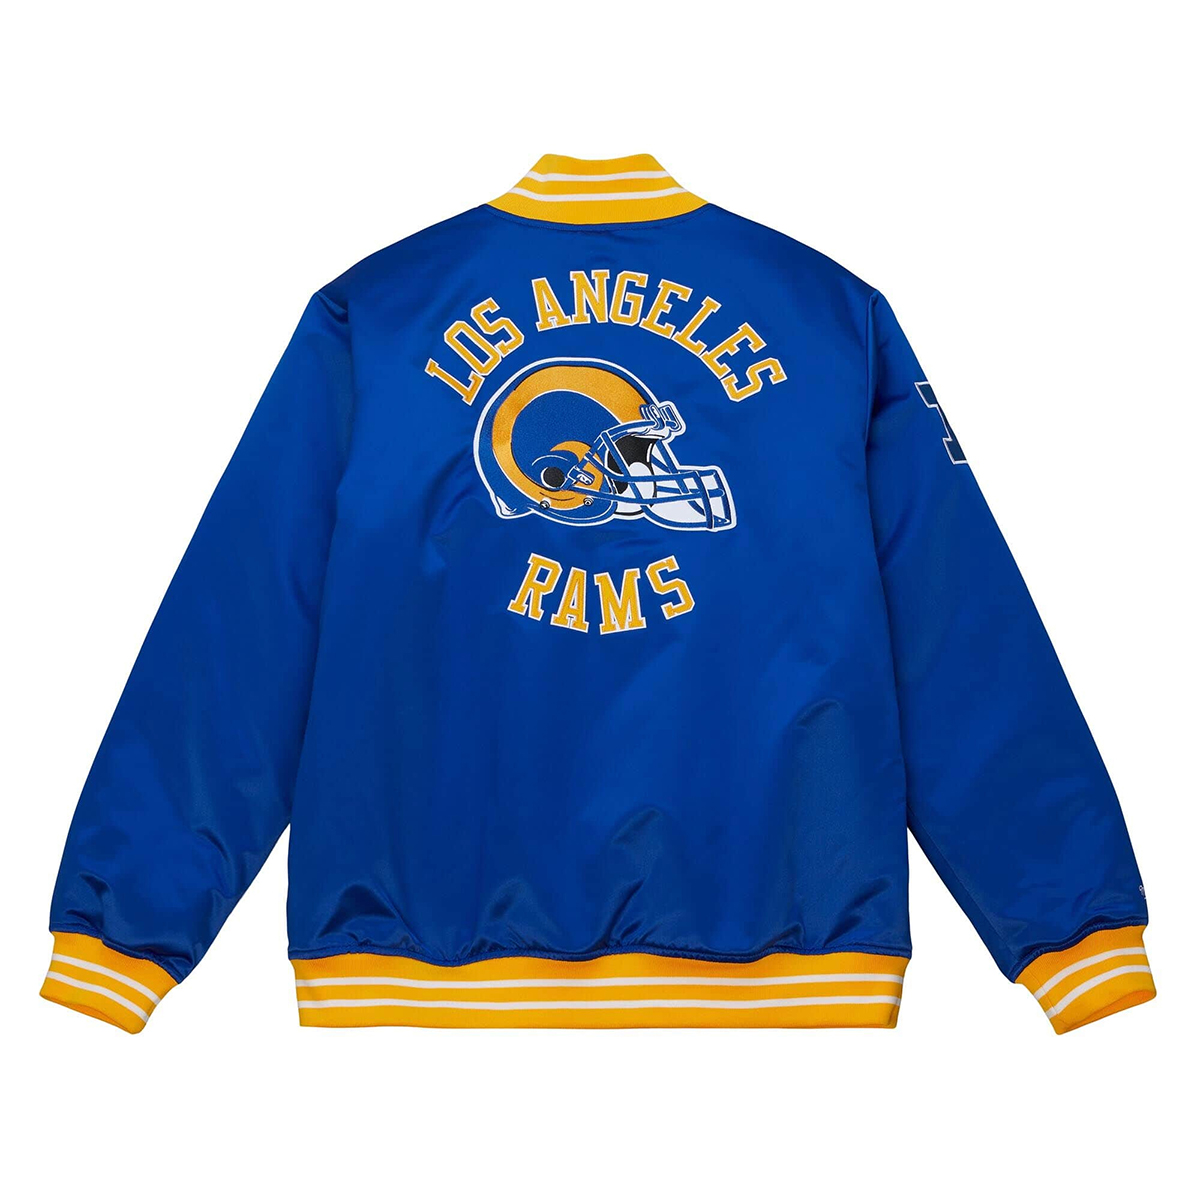 Mitchell And Ness Nfl Los Angeles Rams Heavyweight Satin Jacket, Royal Blue